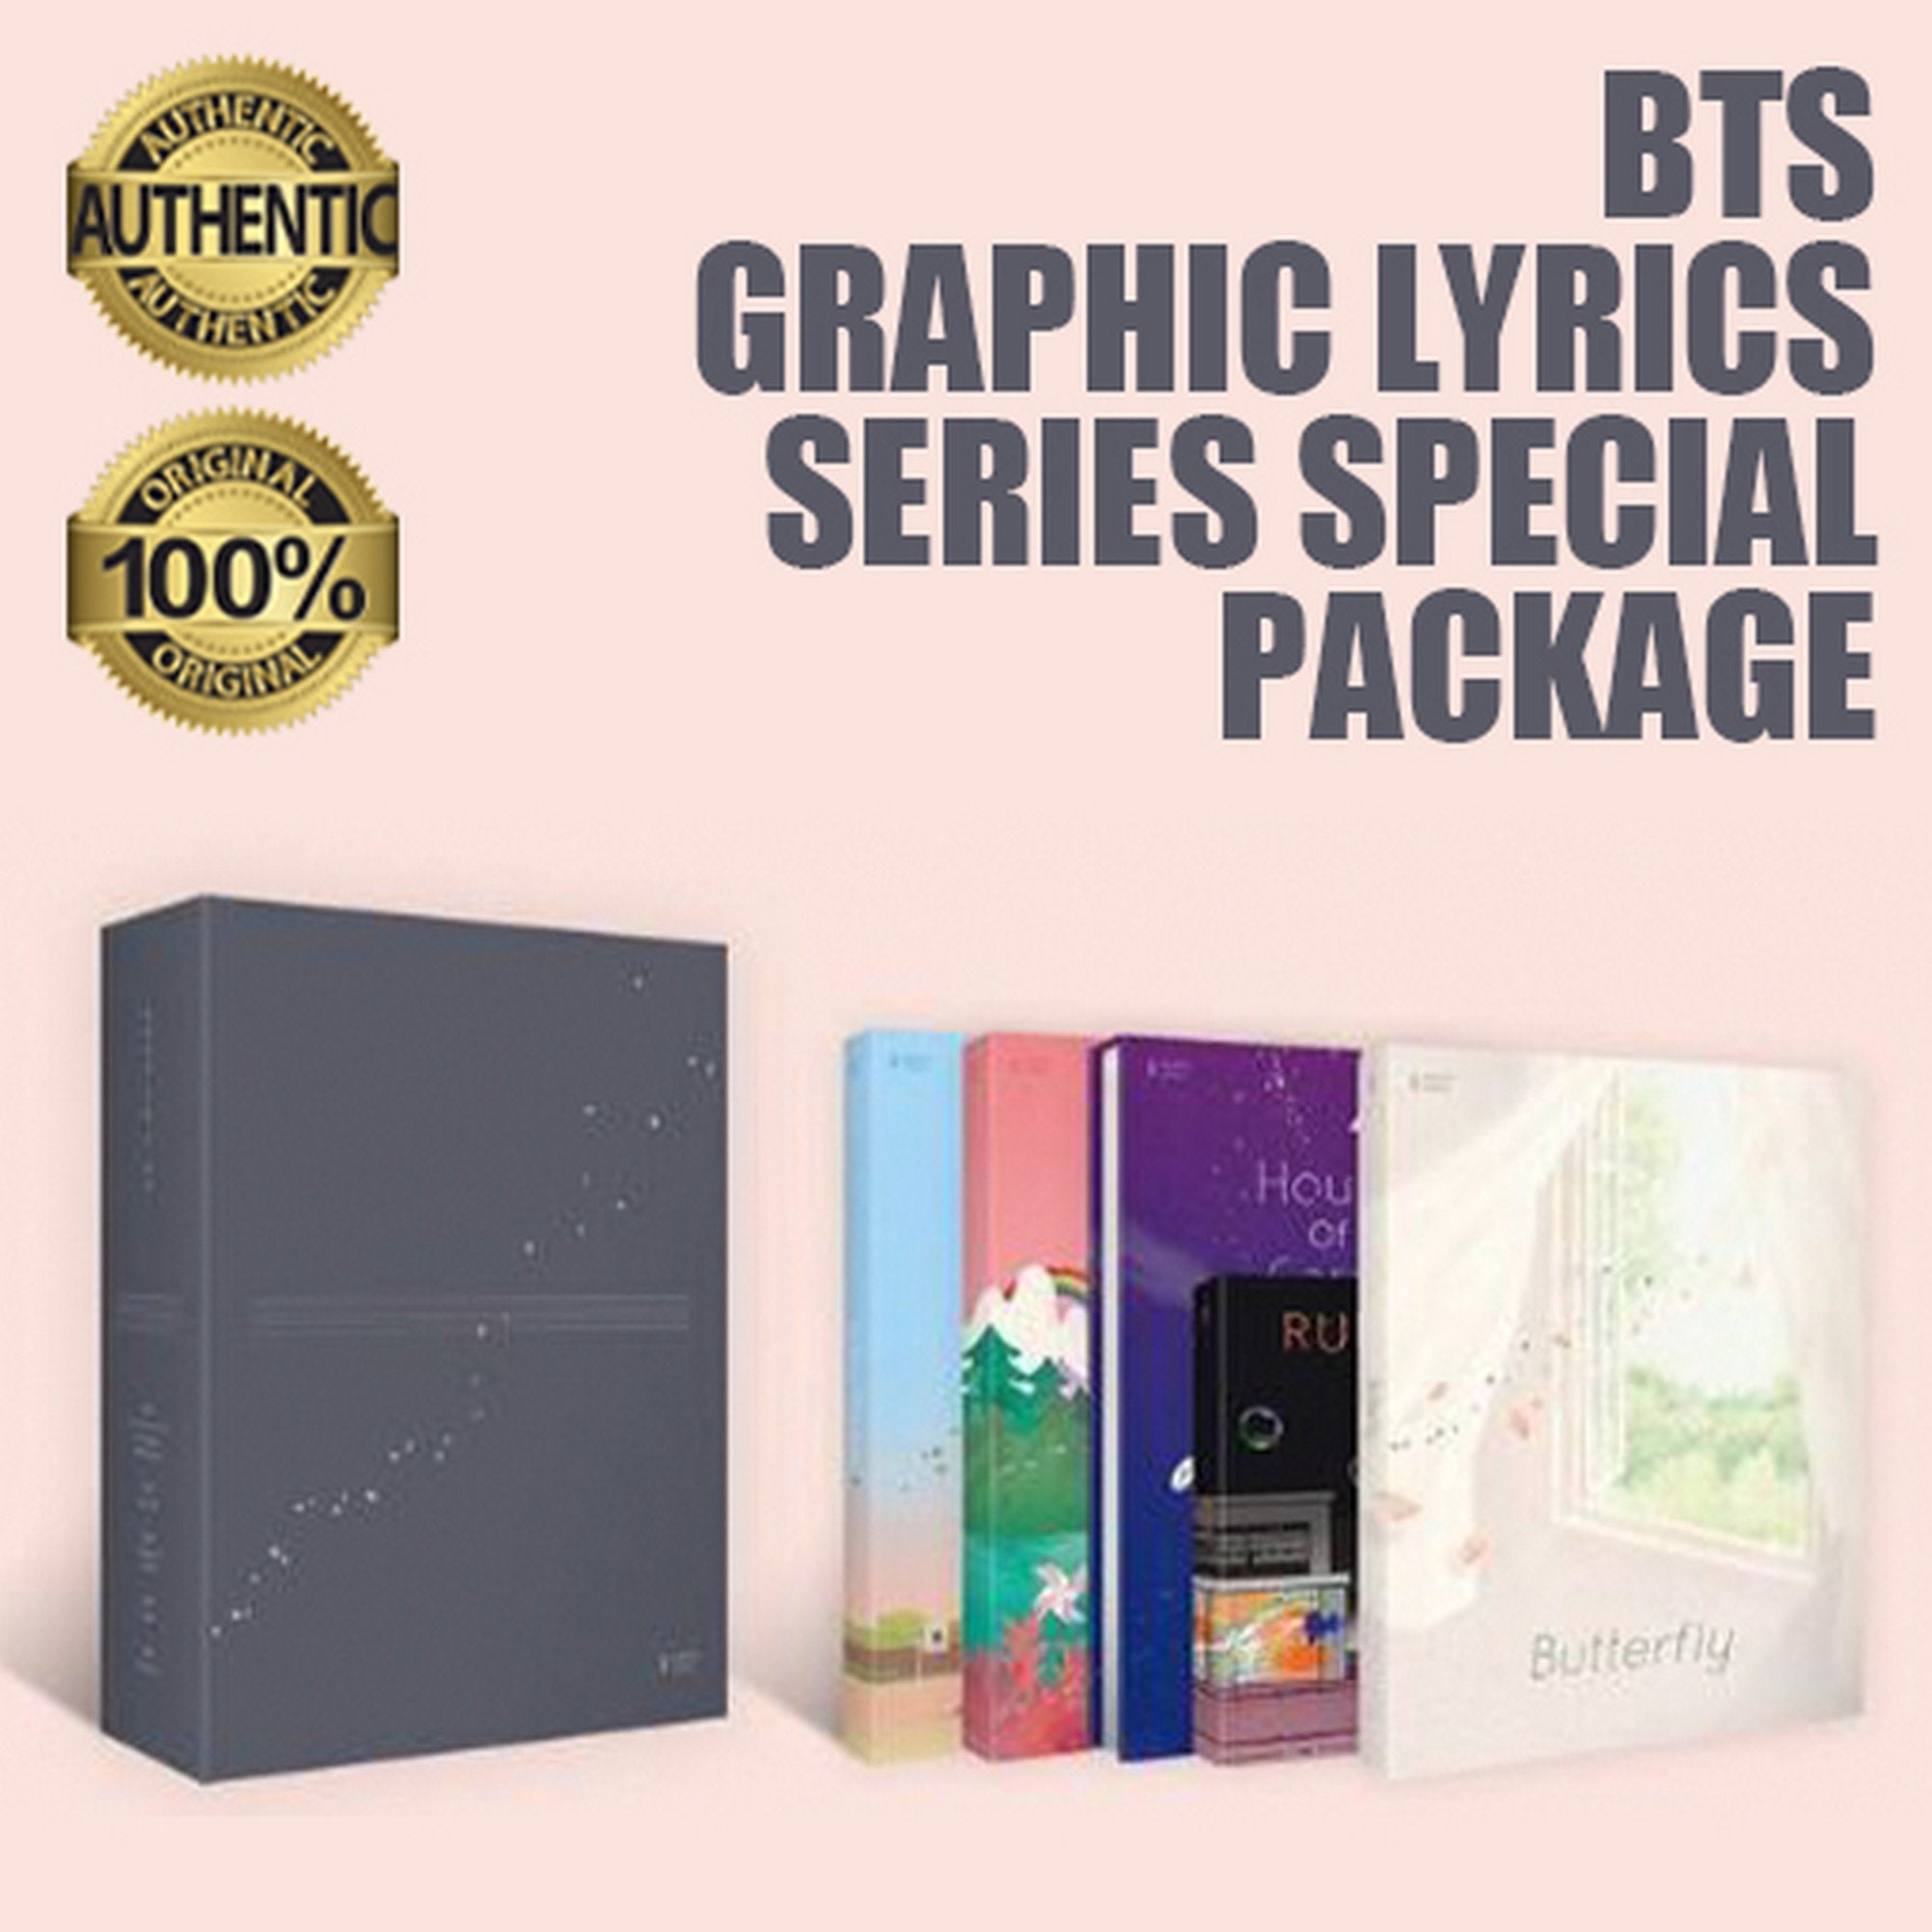 BTS Graphic Lyrics Series Special Package With Free Gifts - Etsy